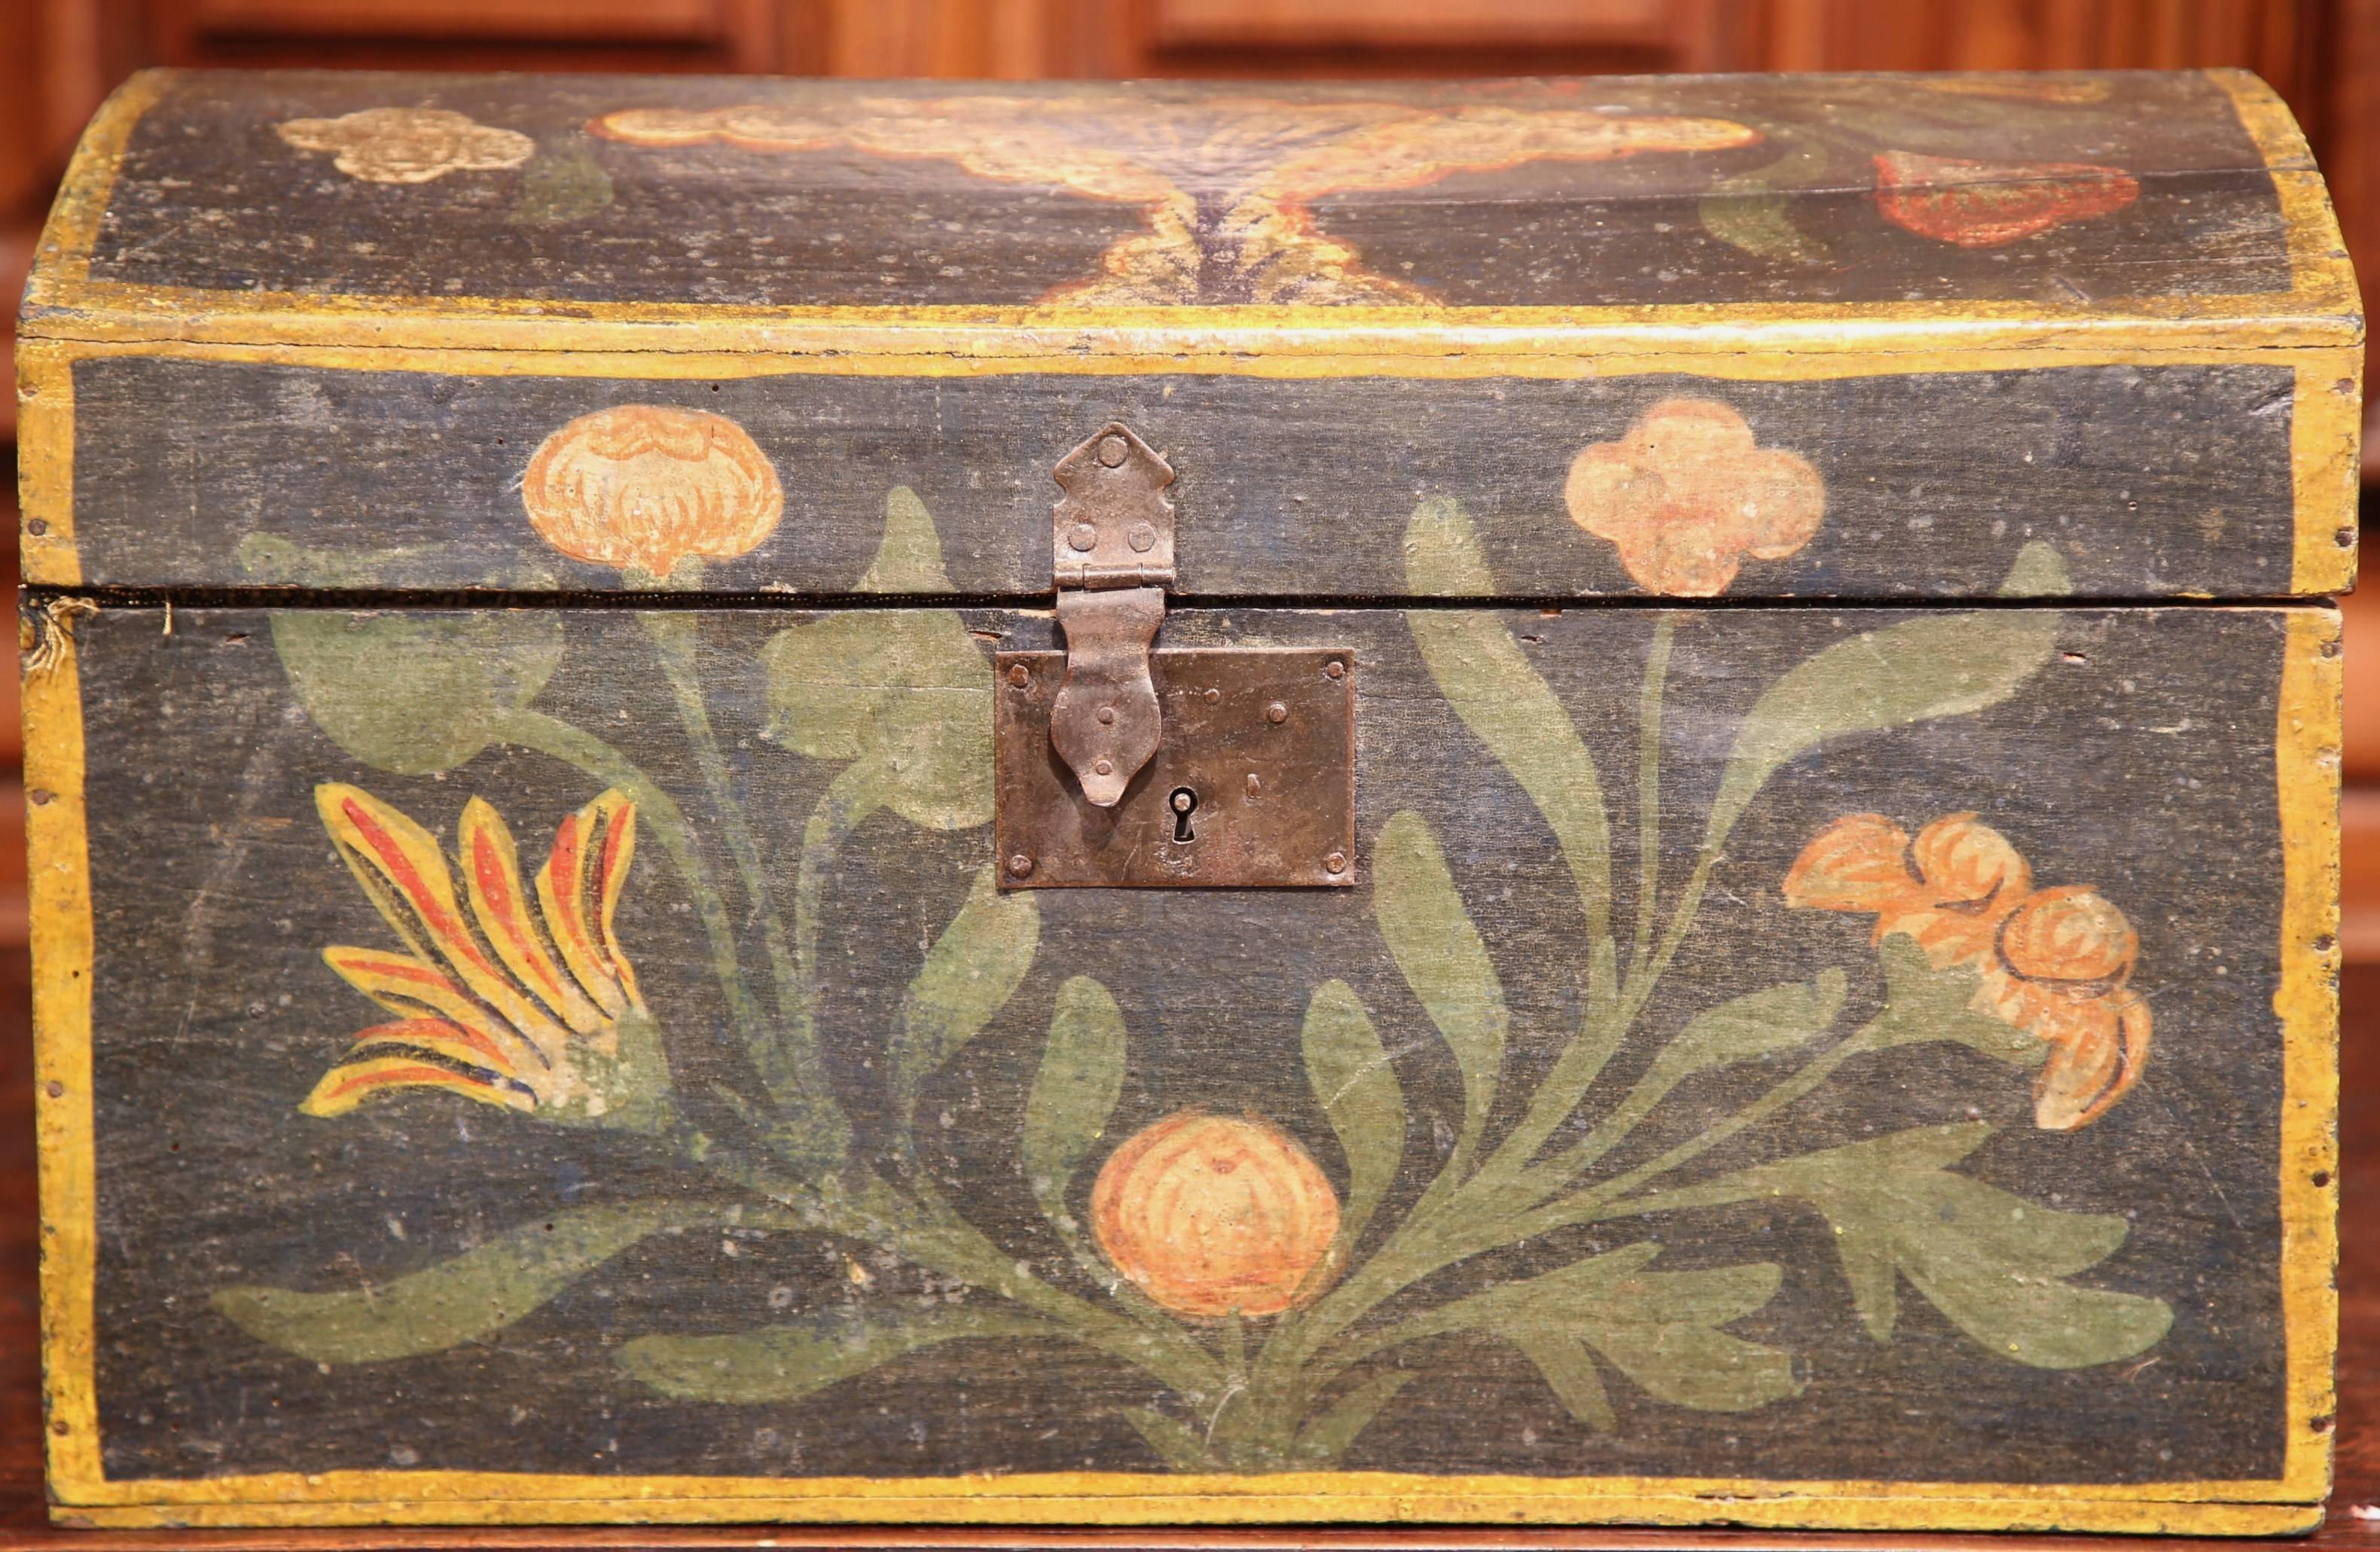 This beautifully kept antique wedding trunk was crafted in northern France, circa 1780. The classic box has a colorful exterior with hand-painted flowers, green leaves, and a decorative dove bird on the top. The trunk has its original paint finish